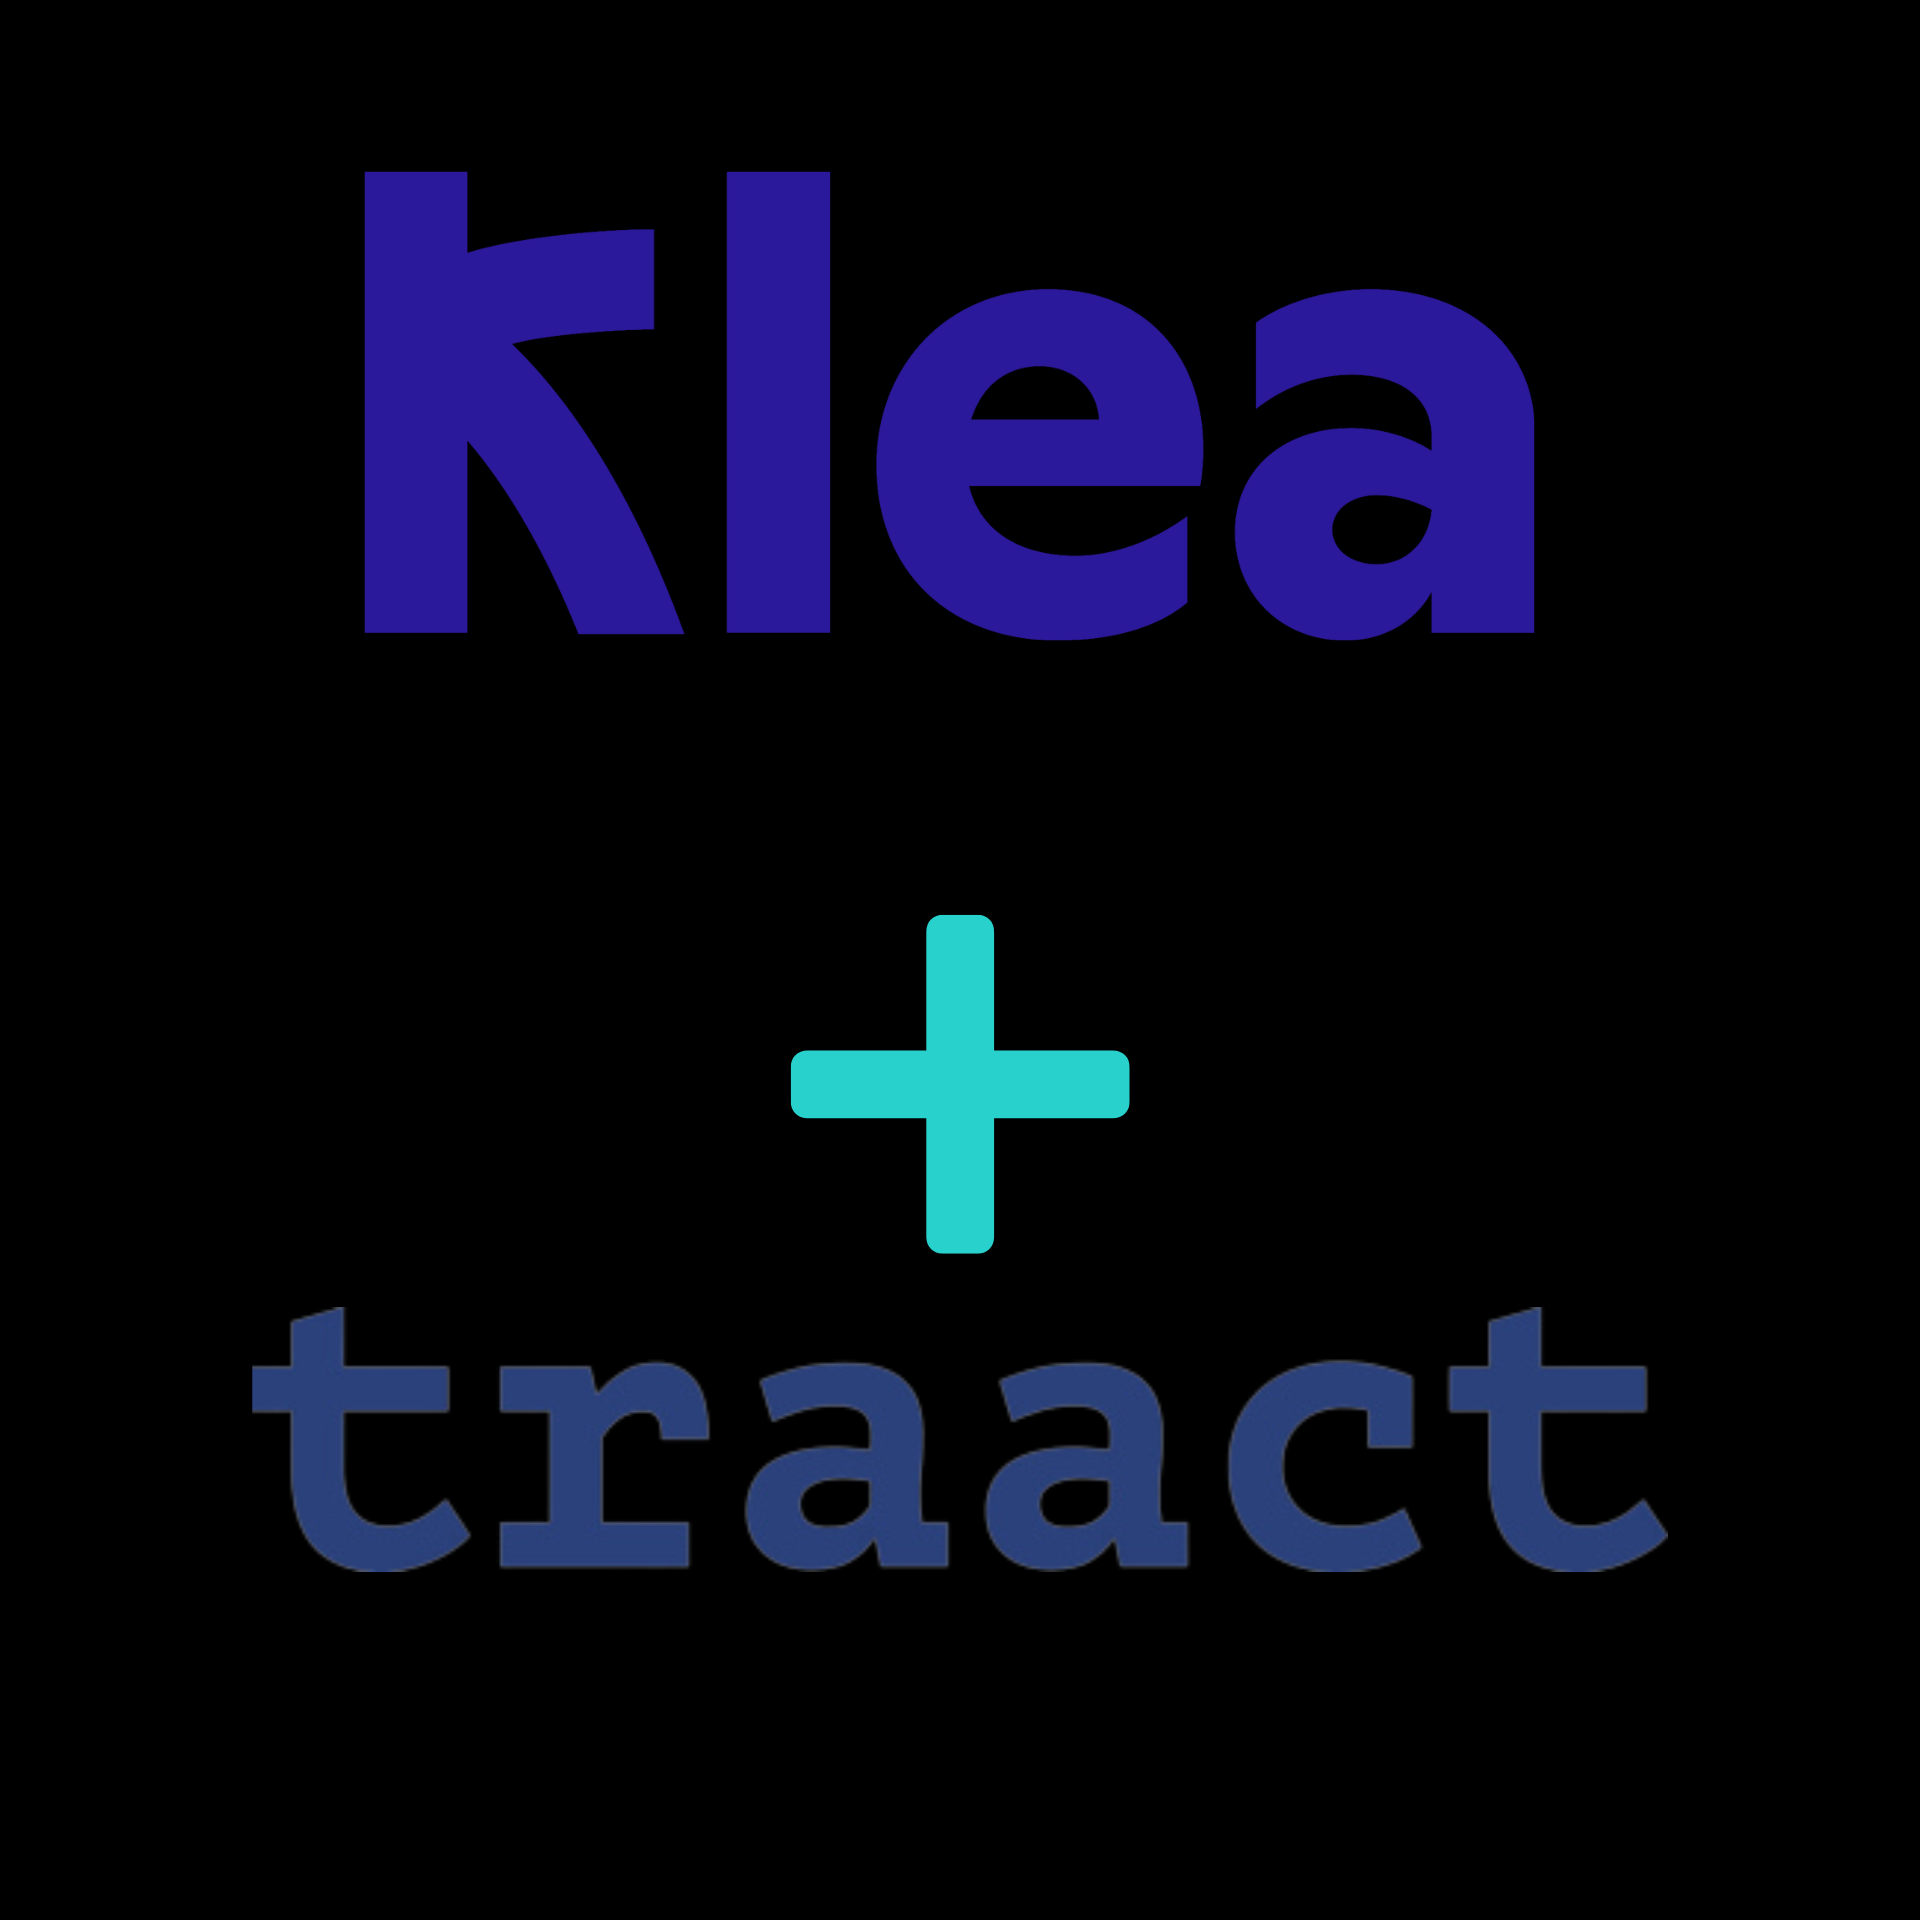 Legal Entity Management Leaders Klea and Traact Join Forces to Provide Optimized Solutions on a Global Scale